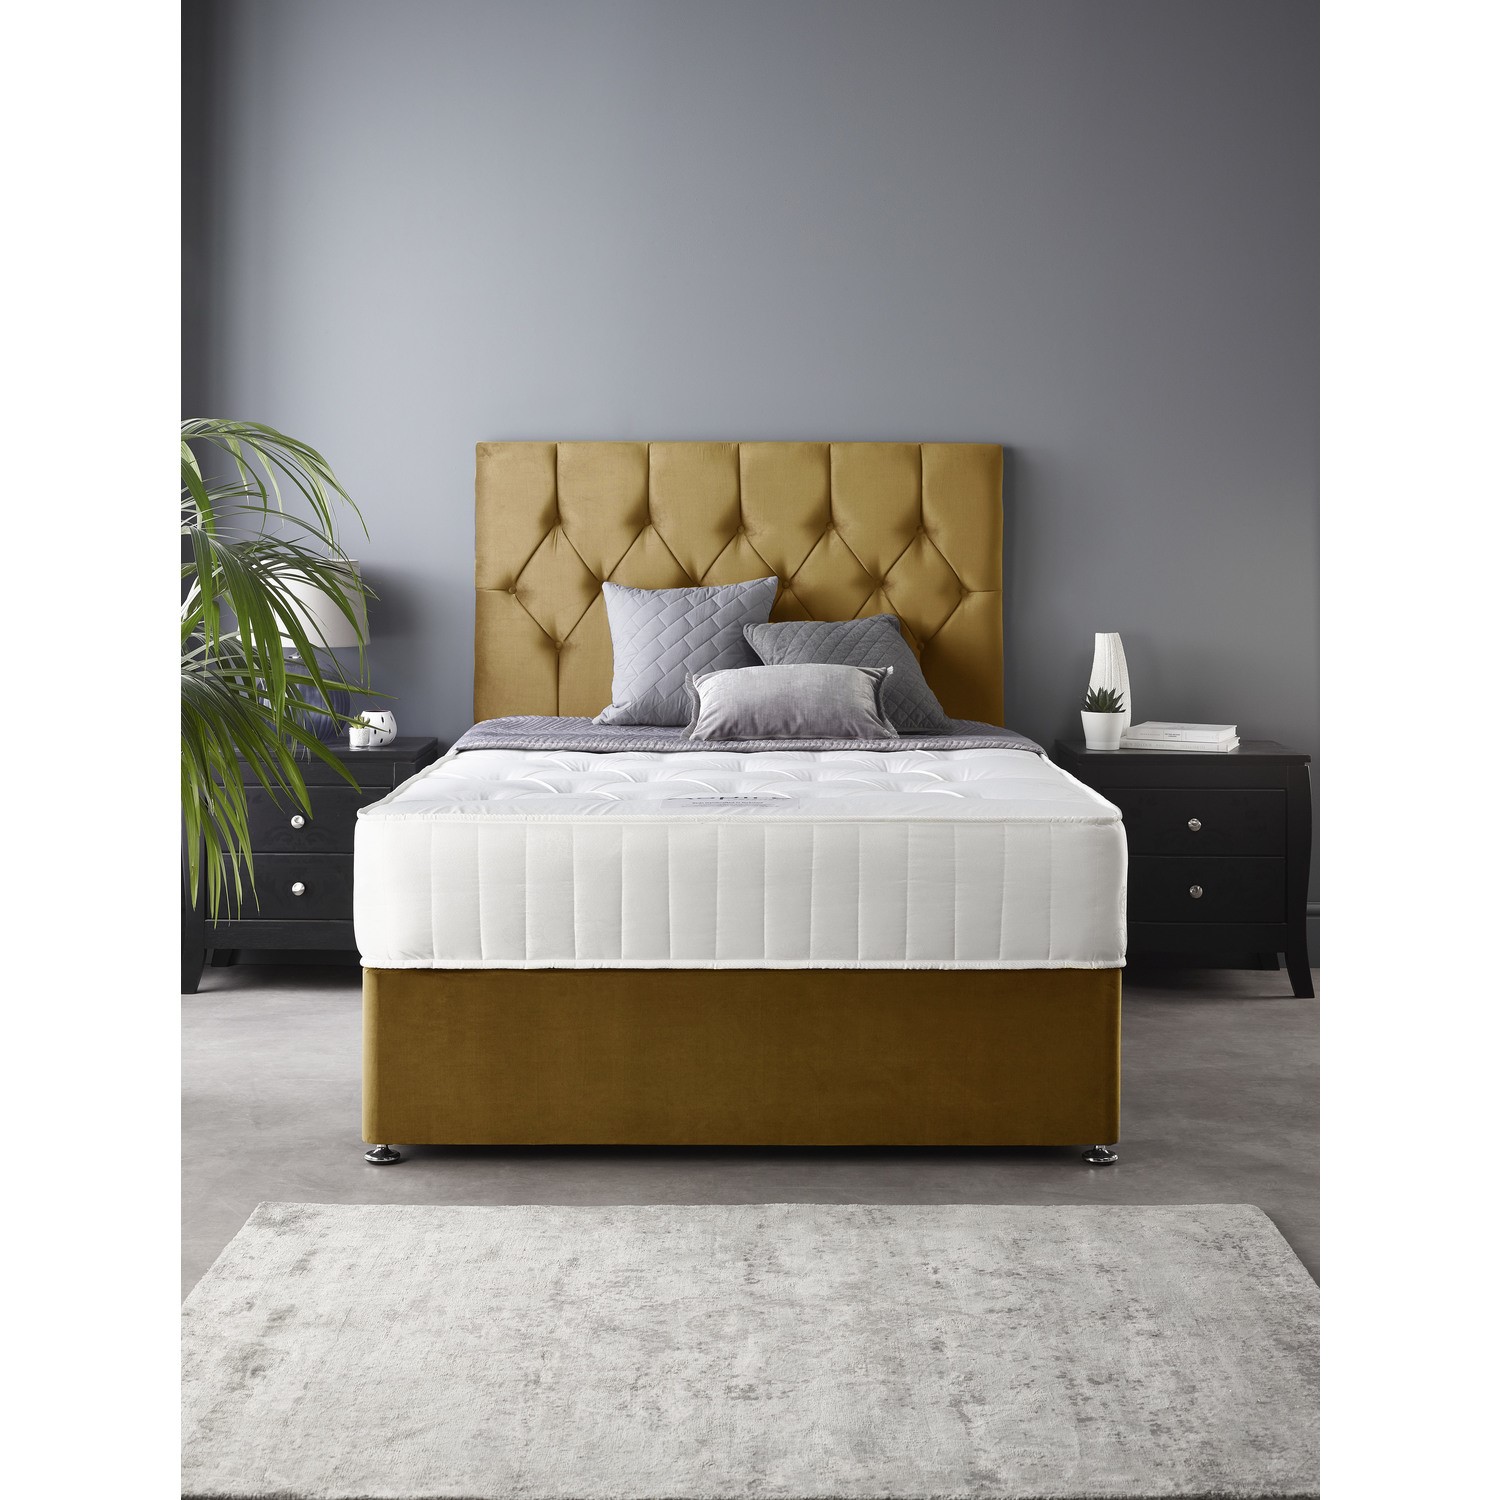 Catherine Lansfield Boutique Ottoman Bed